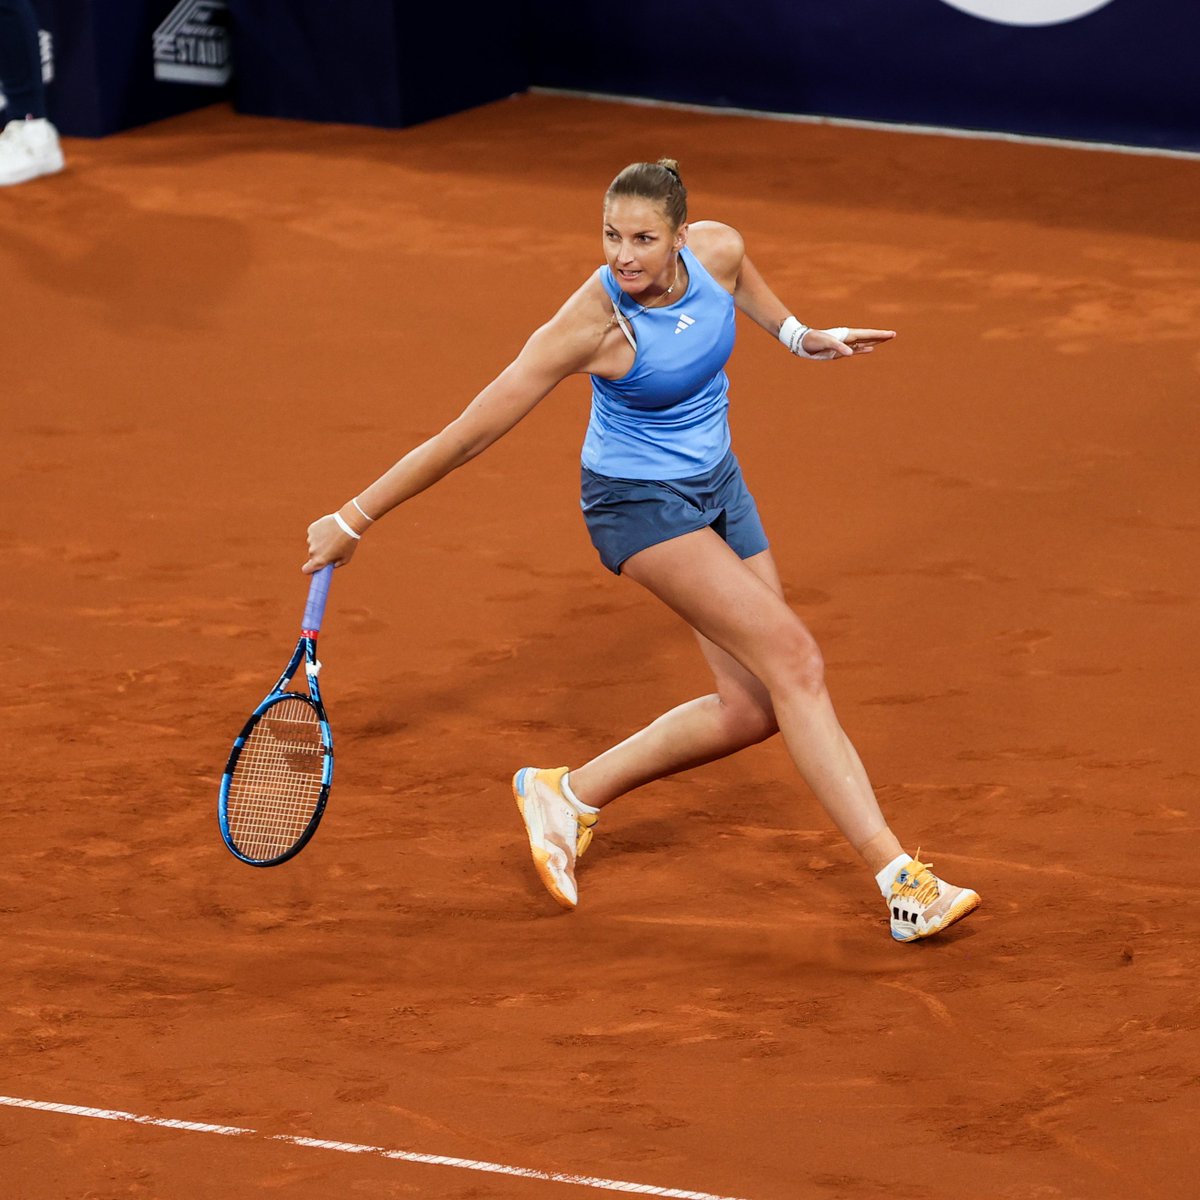 First clay-court W of the season 🧱 Former World No.1 @KaPliskova fires down 12 aces en route to a 7-5, 1-6, 7-5 victory over Polina Kudermetova in Rouen #OpenRouen